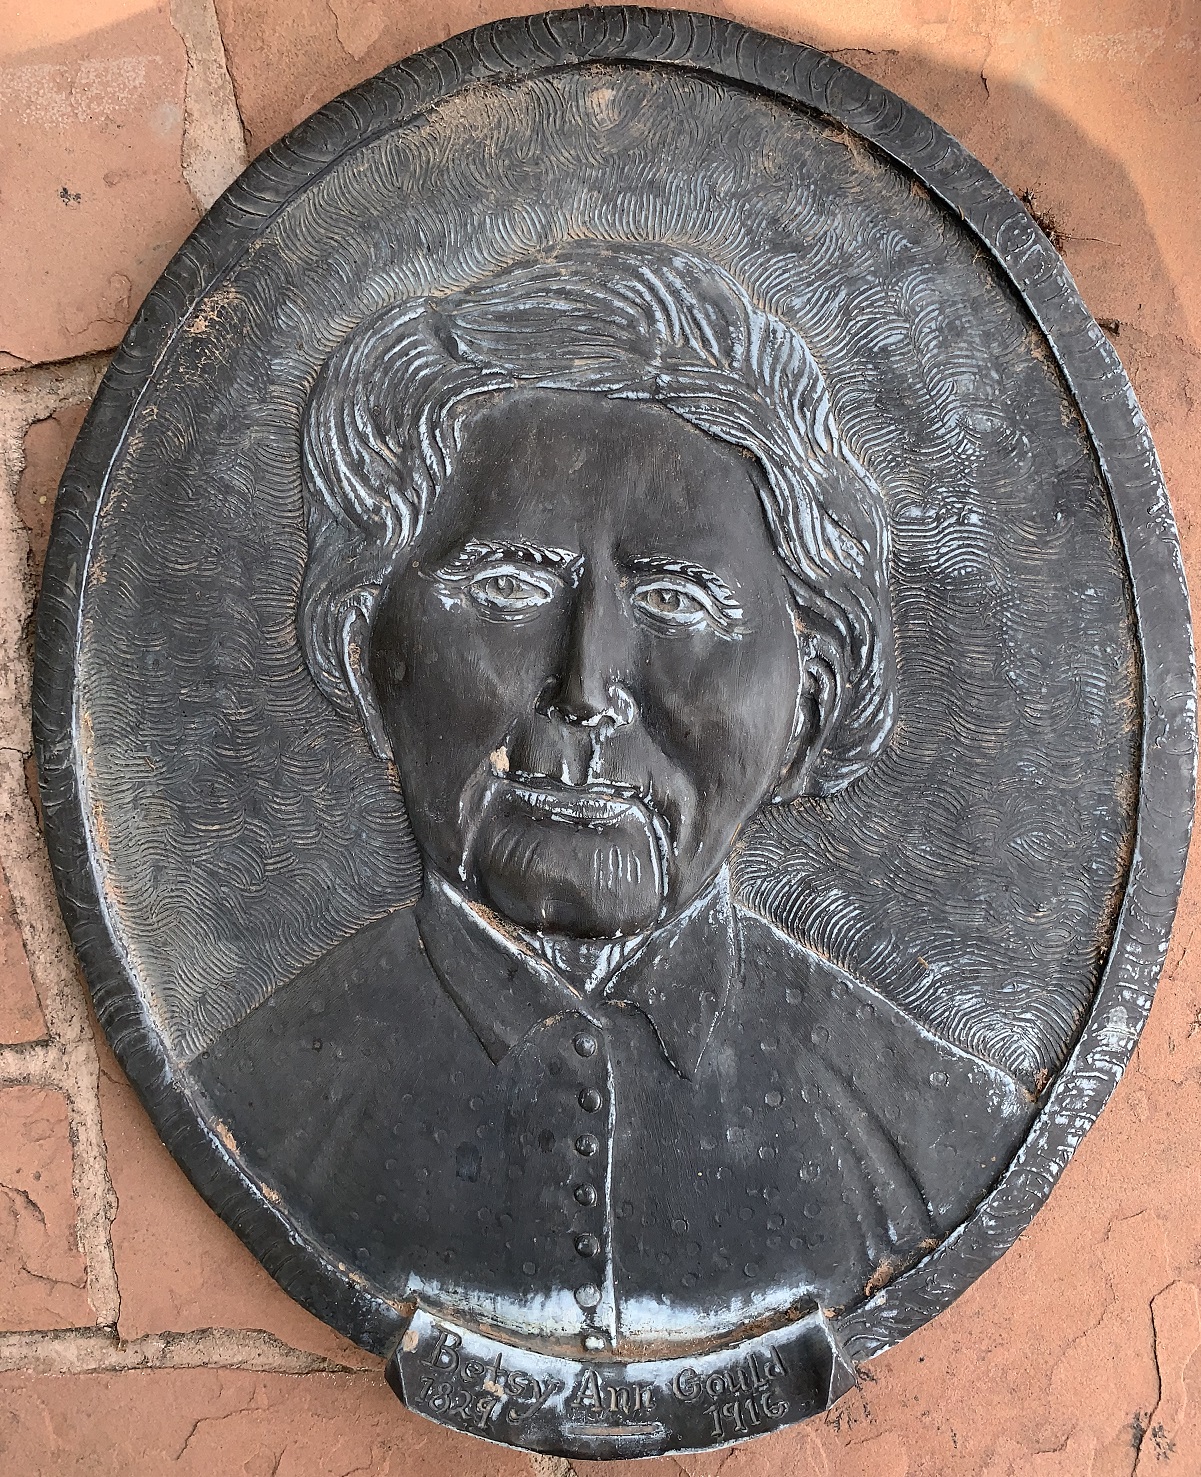 Face plaque of Betsy Ann Gould at the Monument Plaza in Washington, Utah